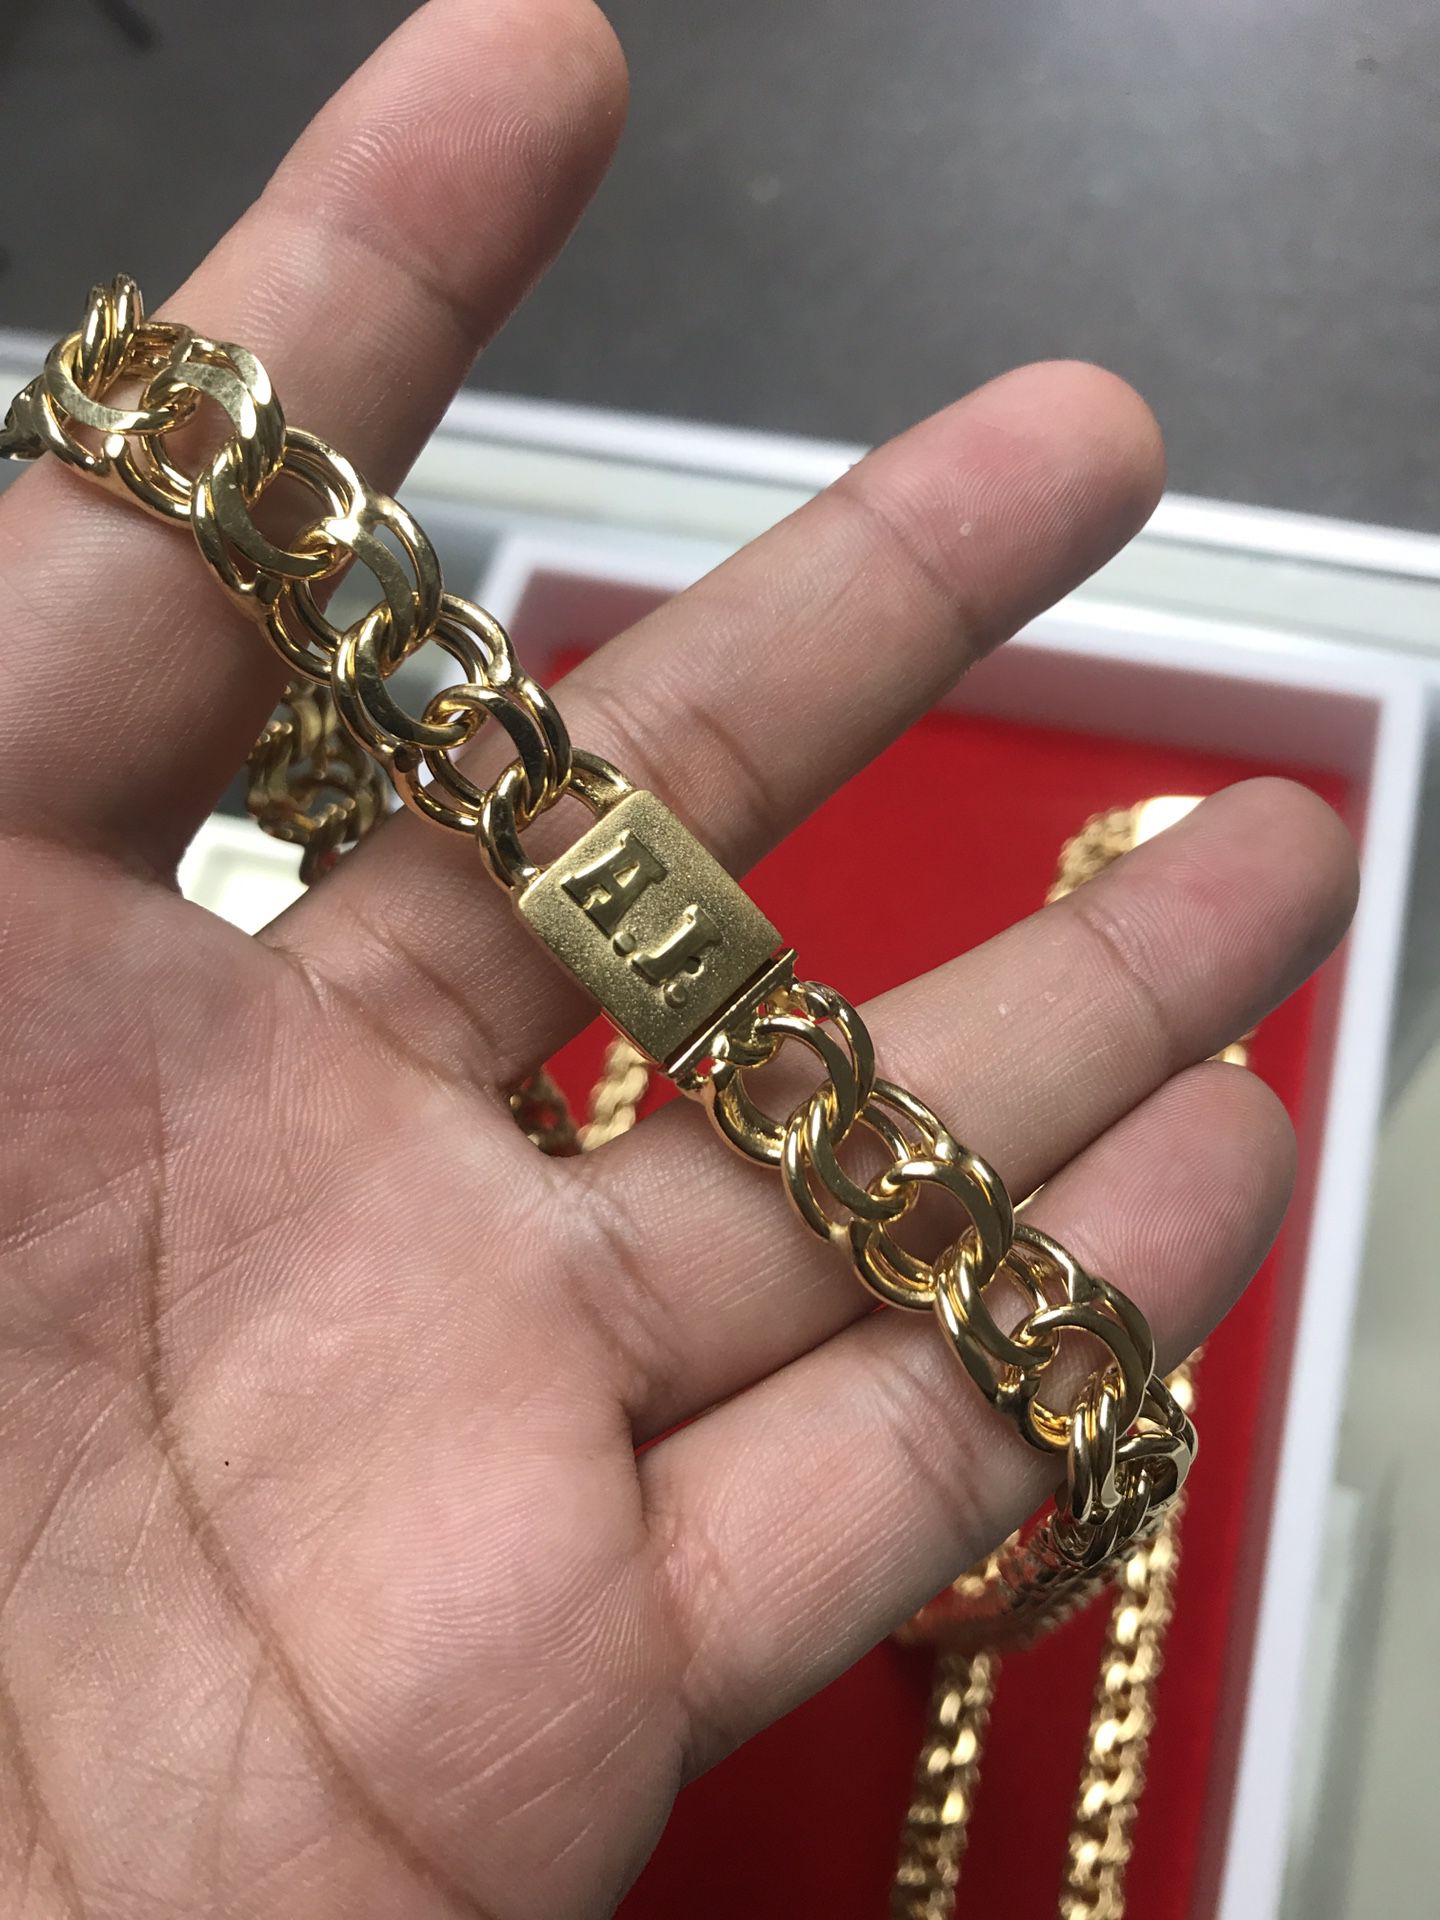 Custom made Gold filled Tejido Chino link chains and bracelets